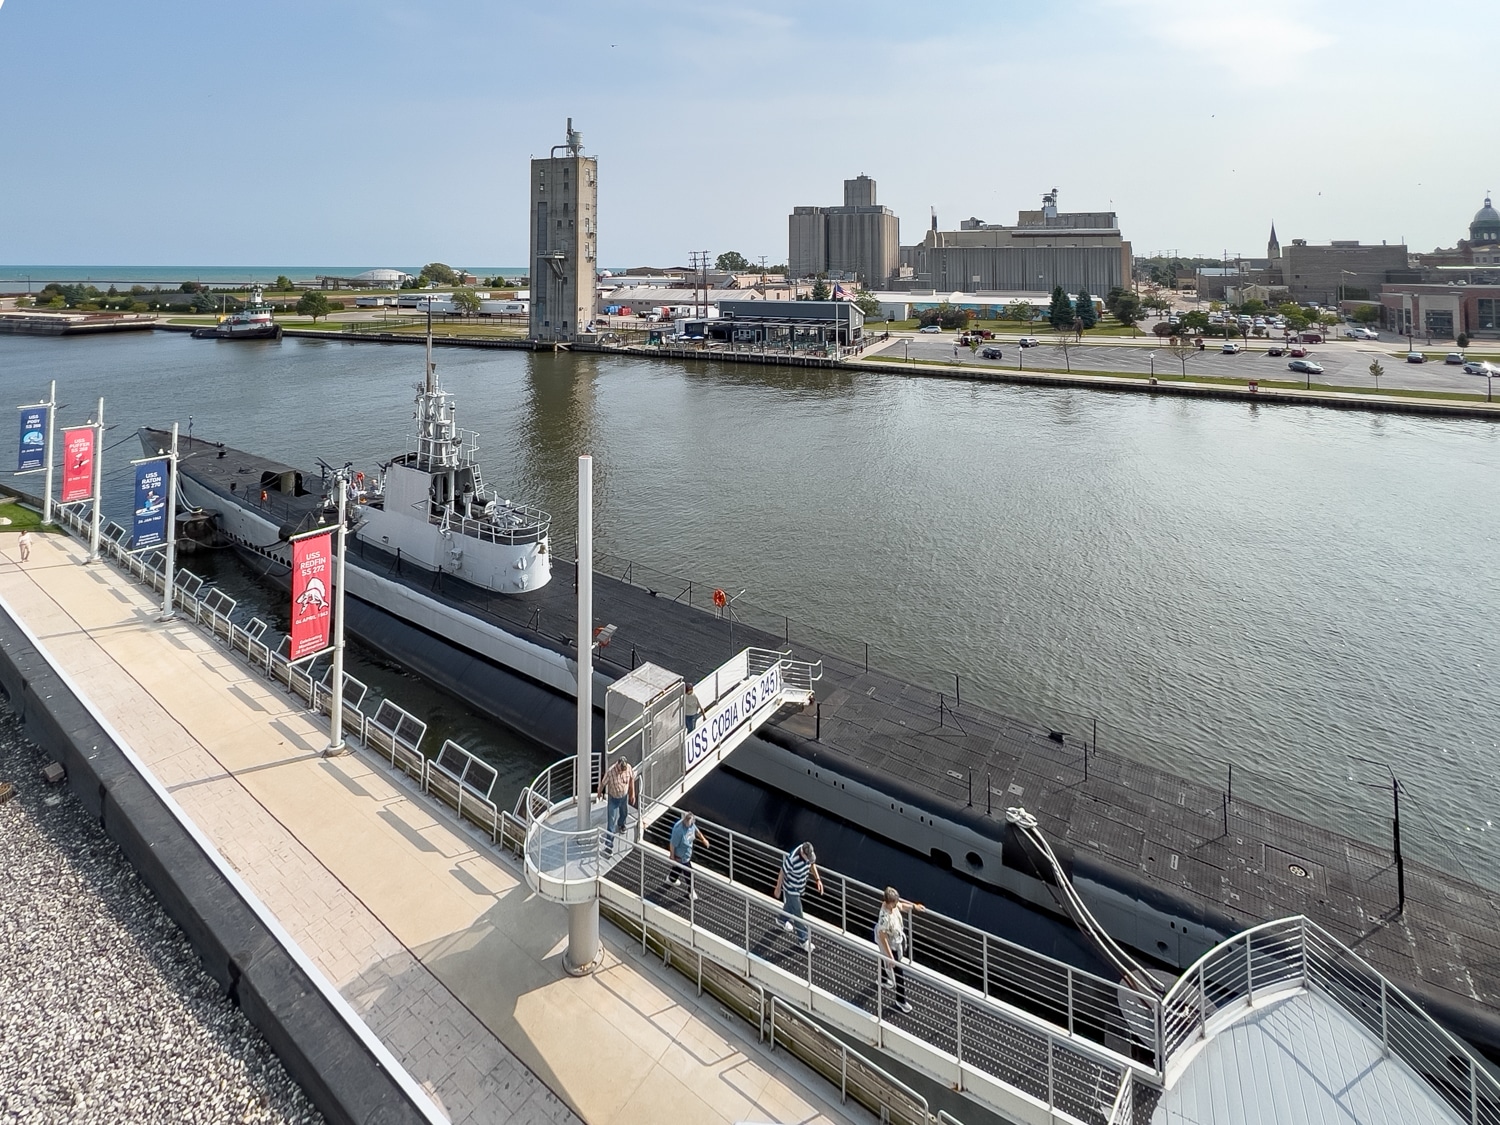 Manitowoc USS Cobia at the Wisconsin Maritime Museum and The Wharf Restaurant across the river